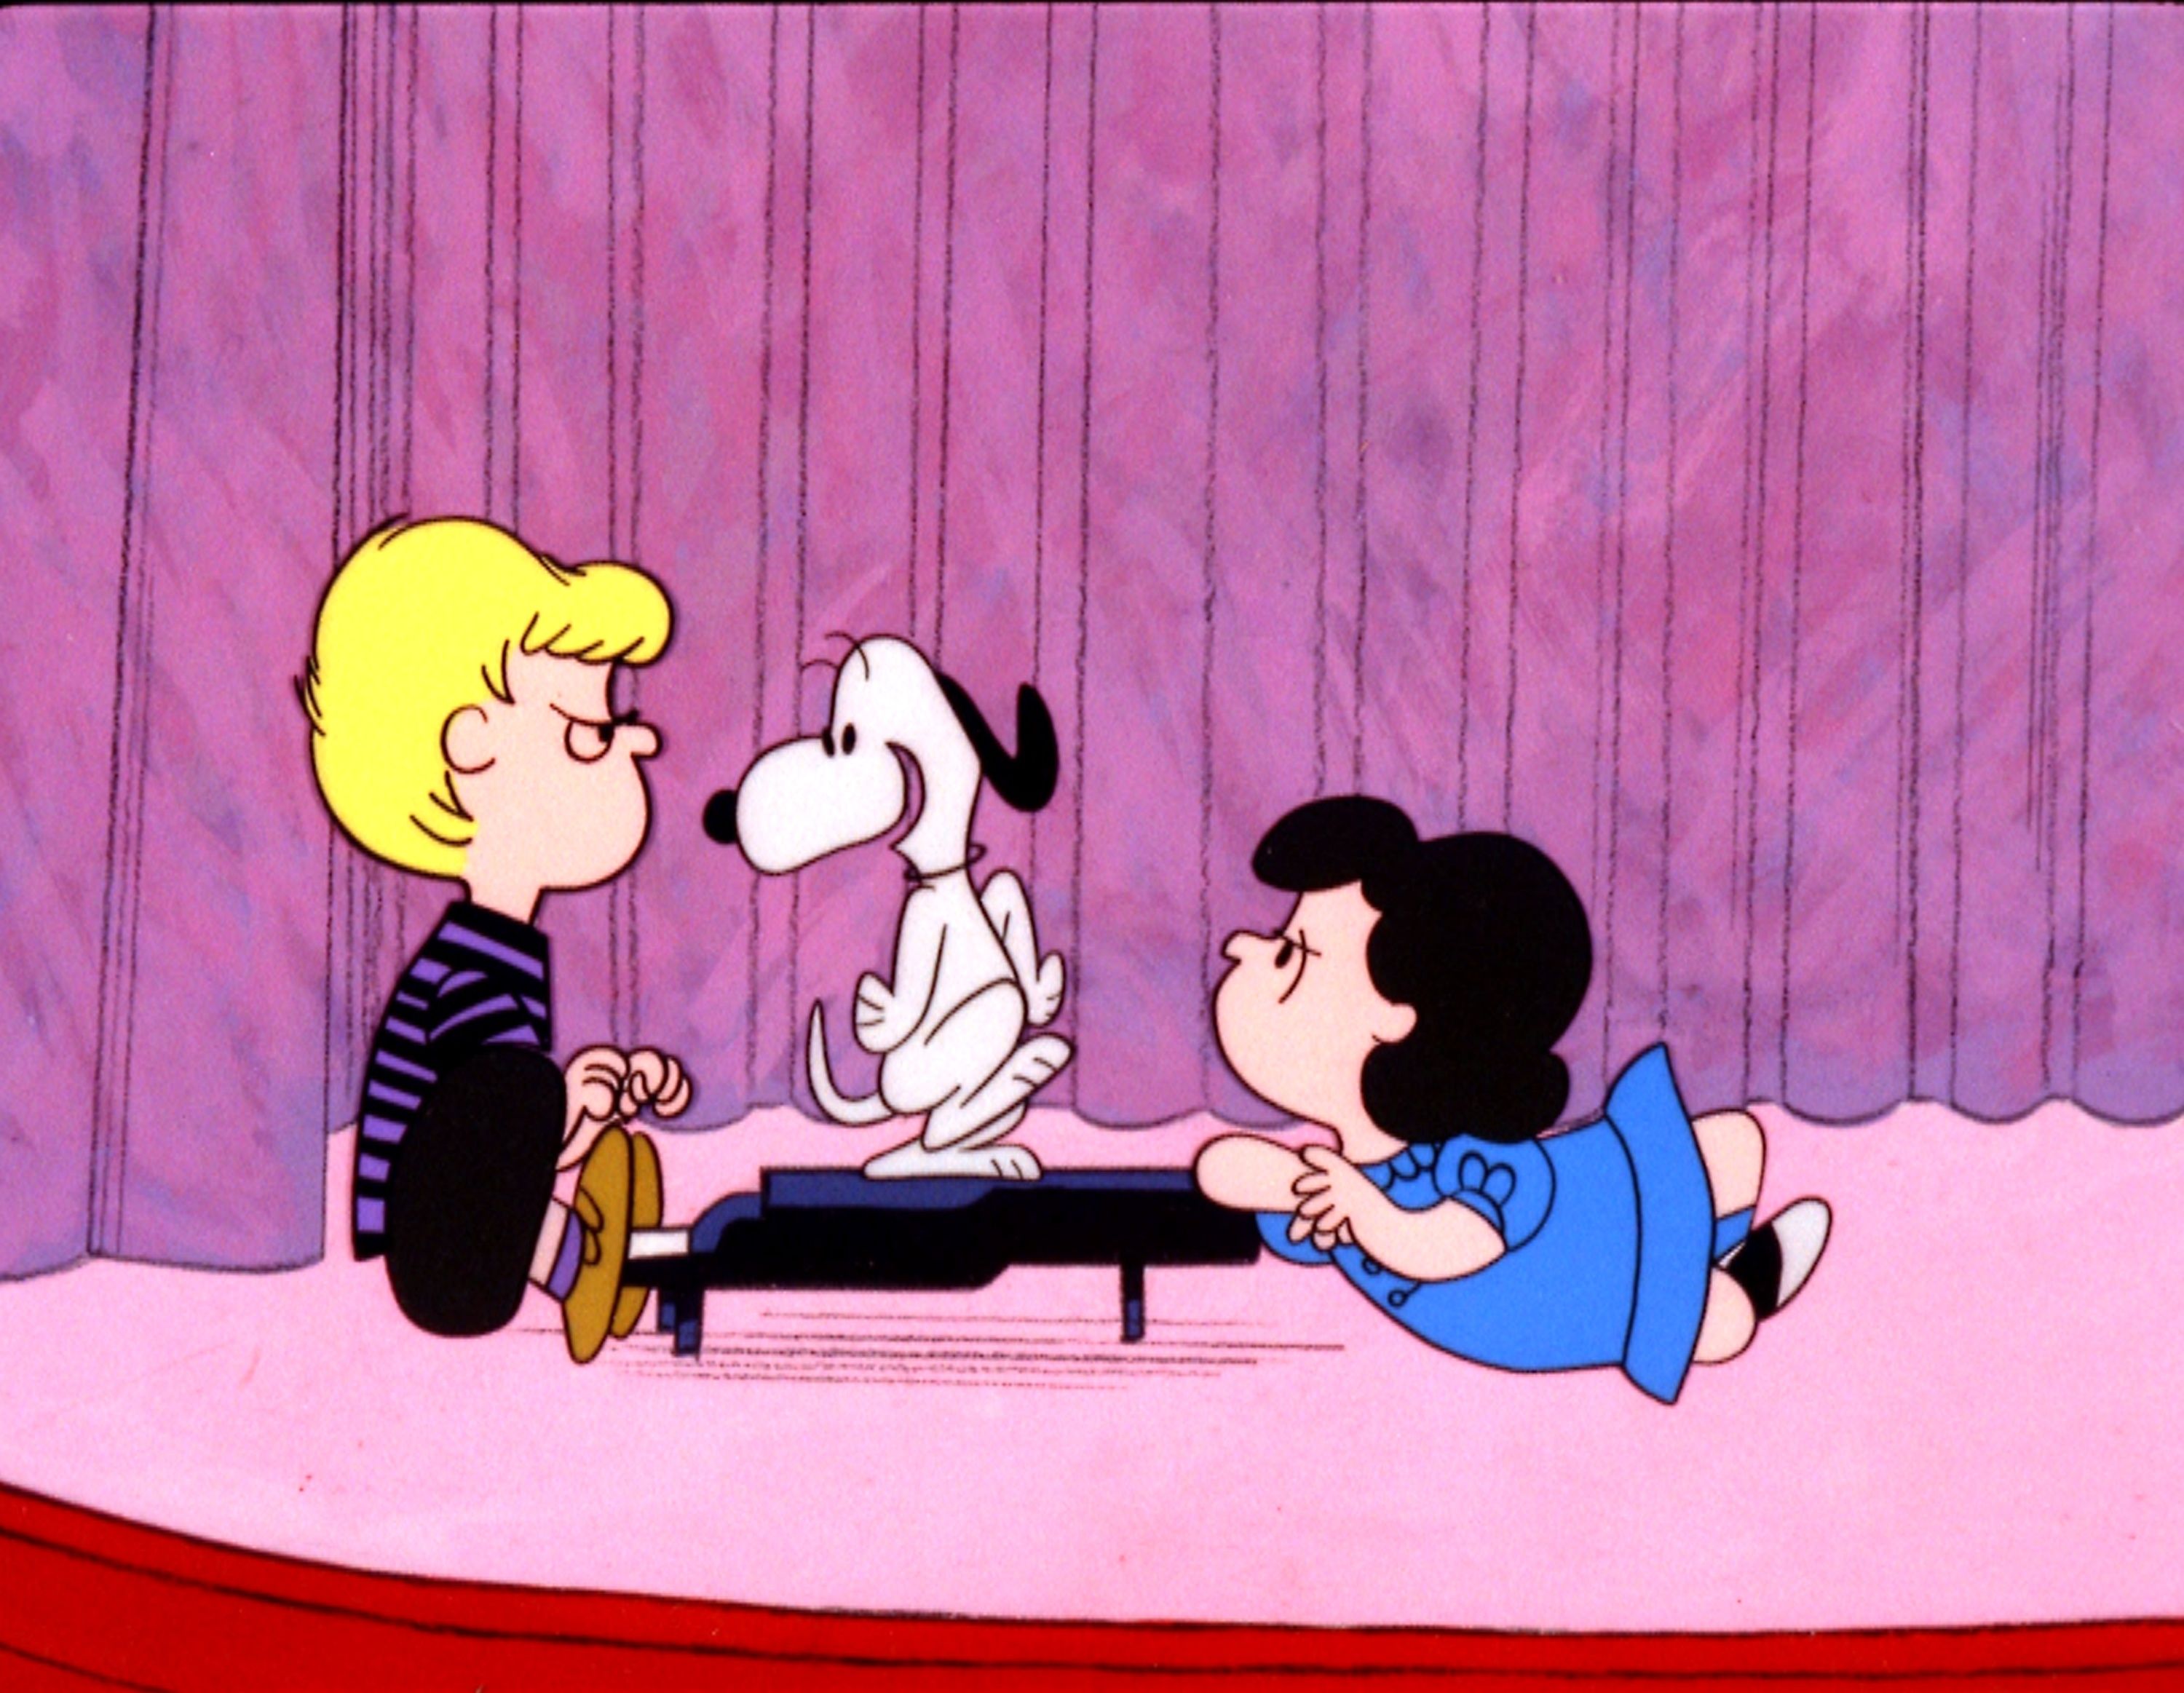 15 Best Quotes From 'A Charlie Brown Christmas' Movie for the Holidays